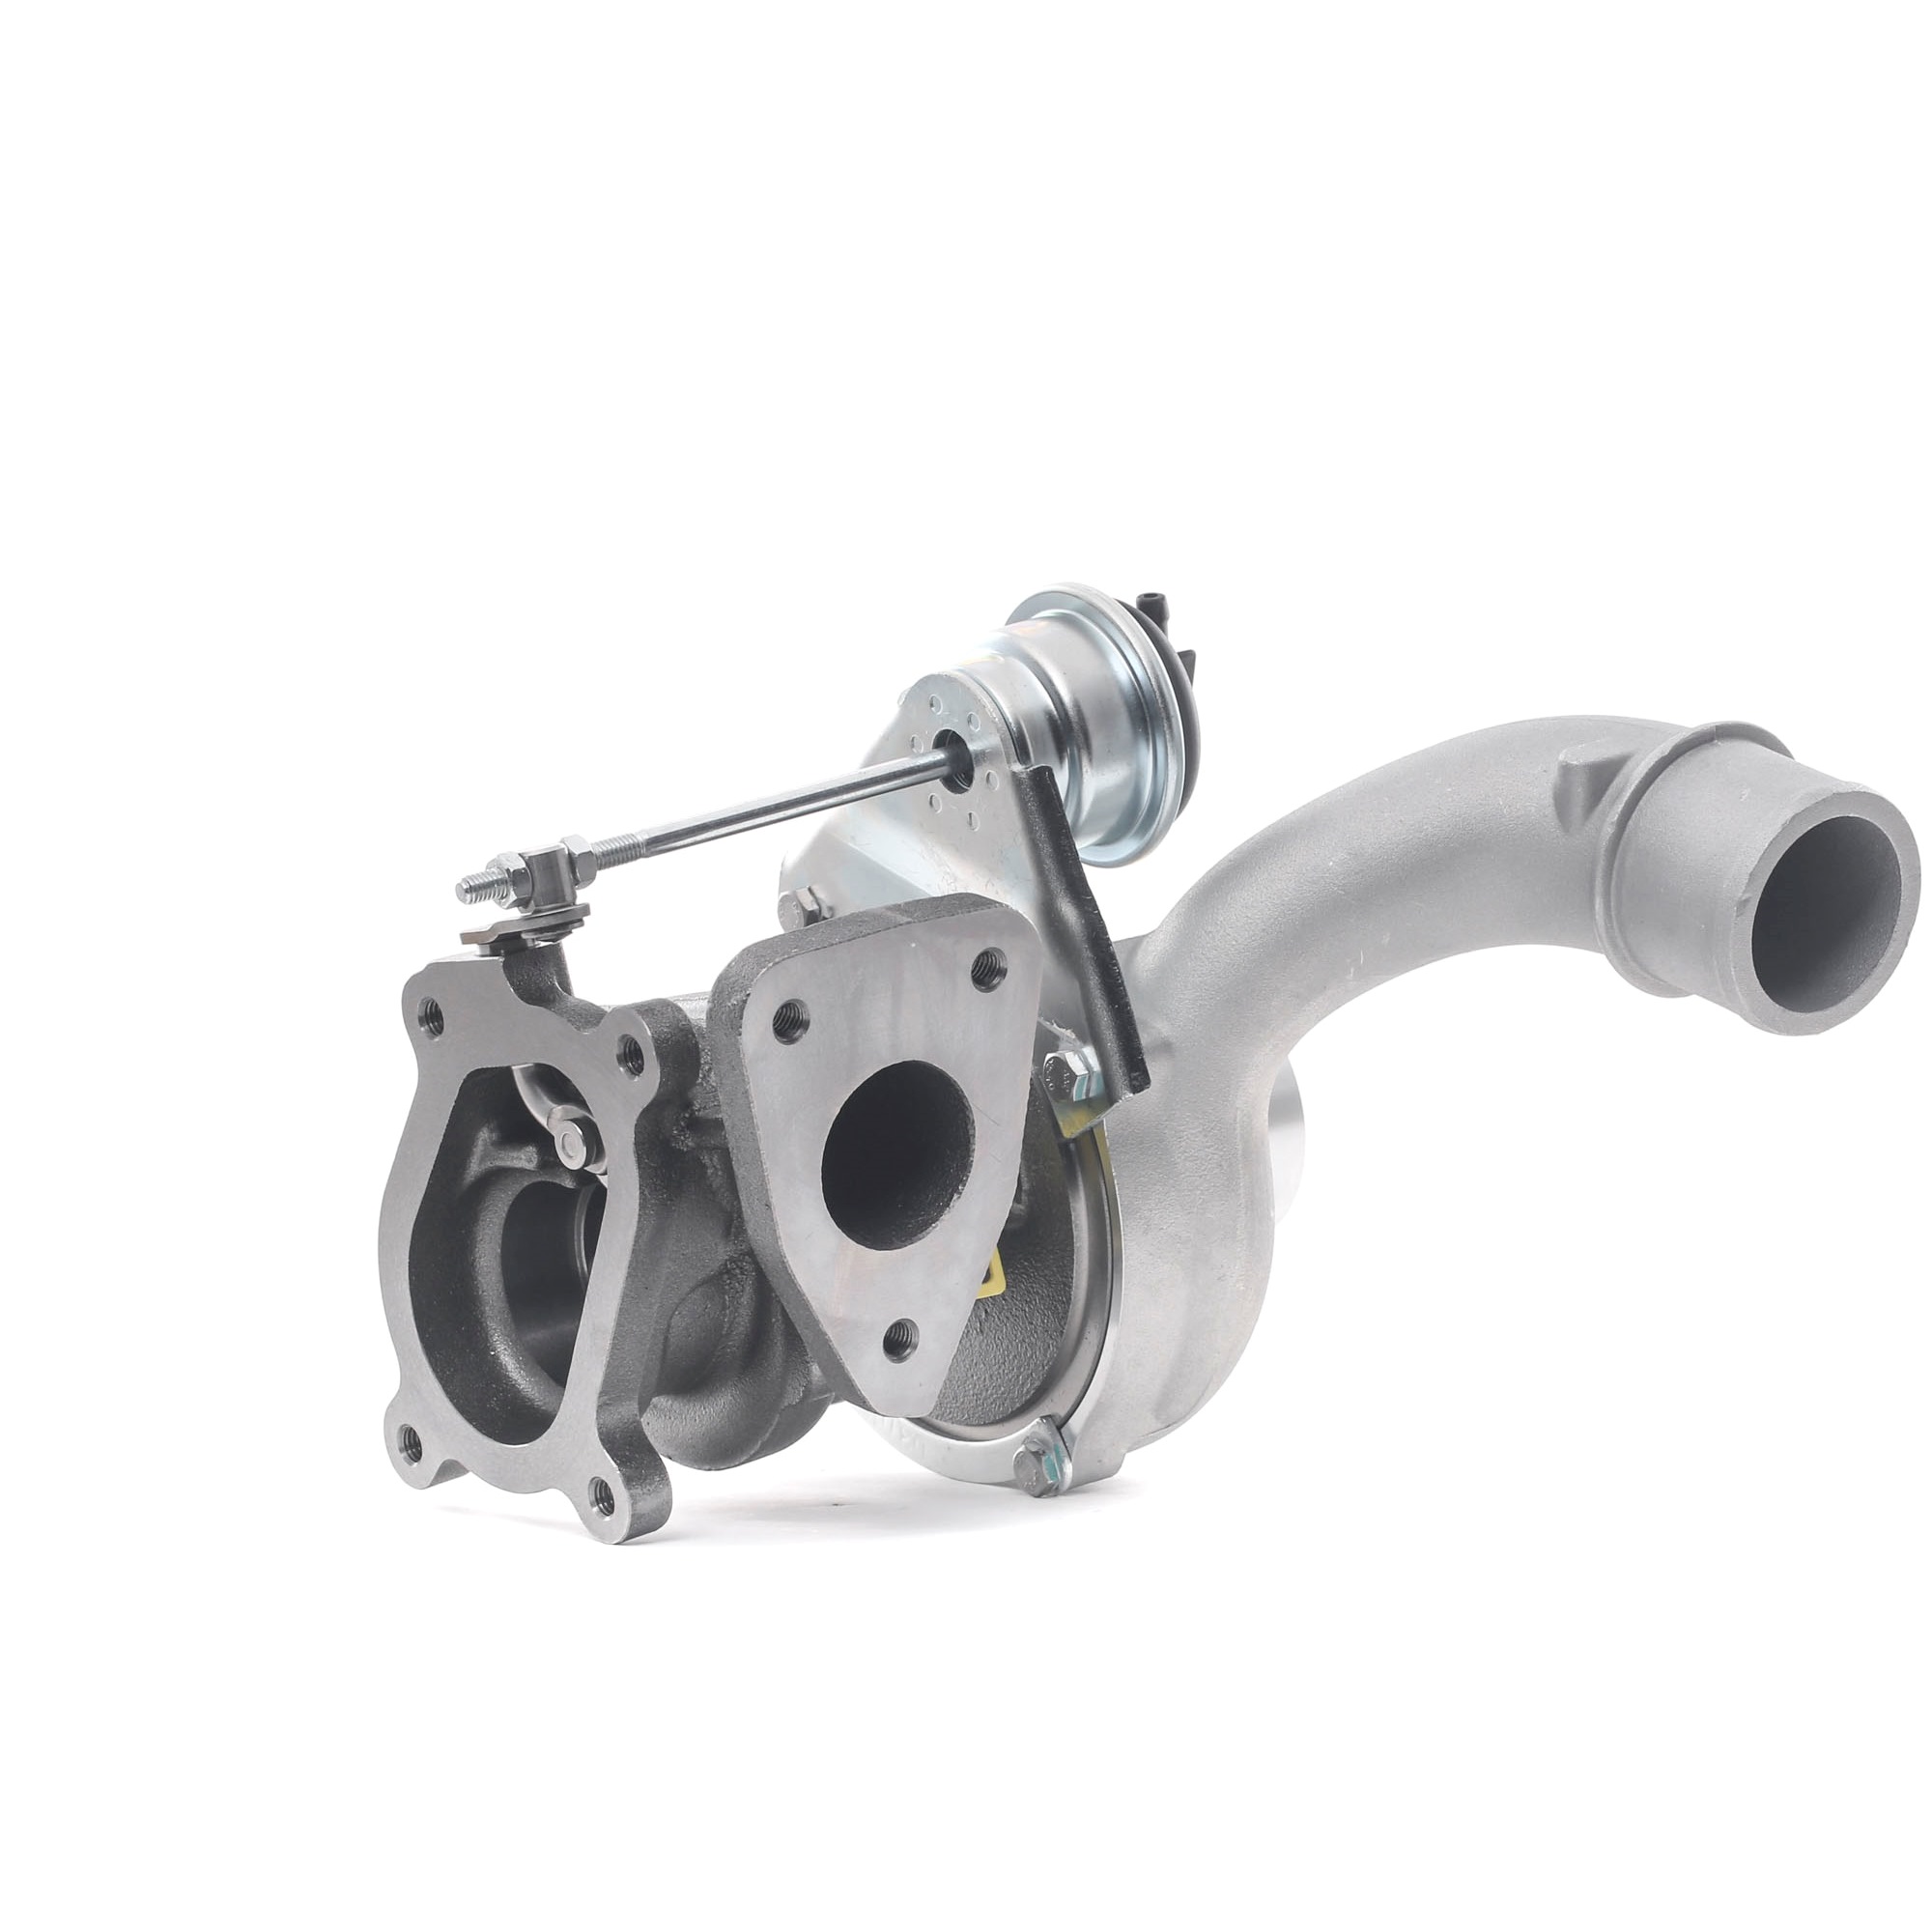 SKCT-1191265 STARK Turbocharger RENAULT Turbo, Pneumatic, with gaskets/seals